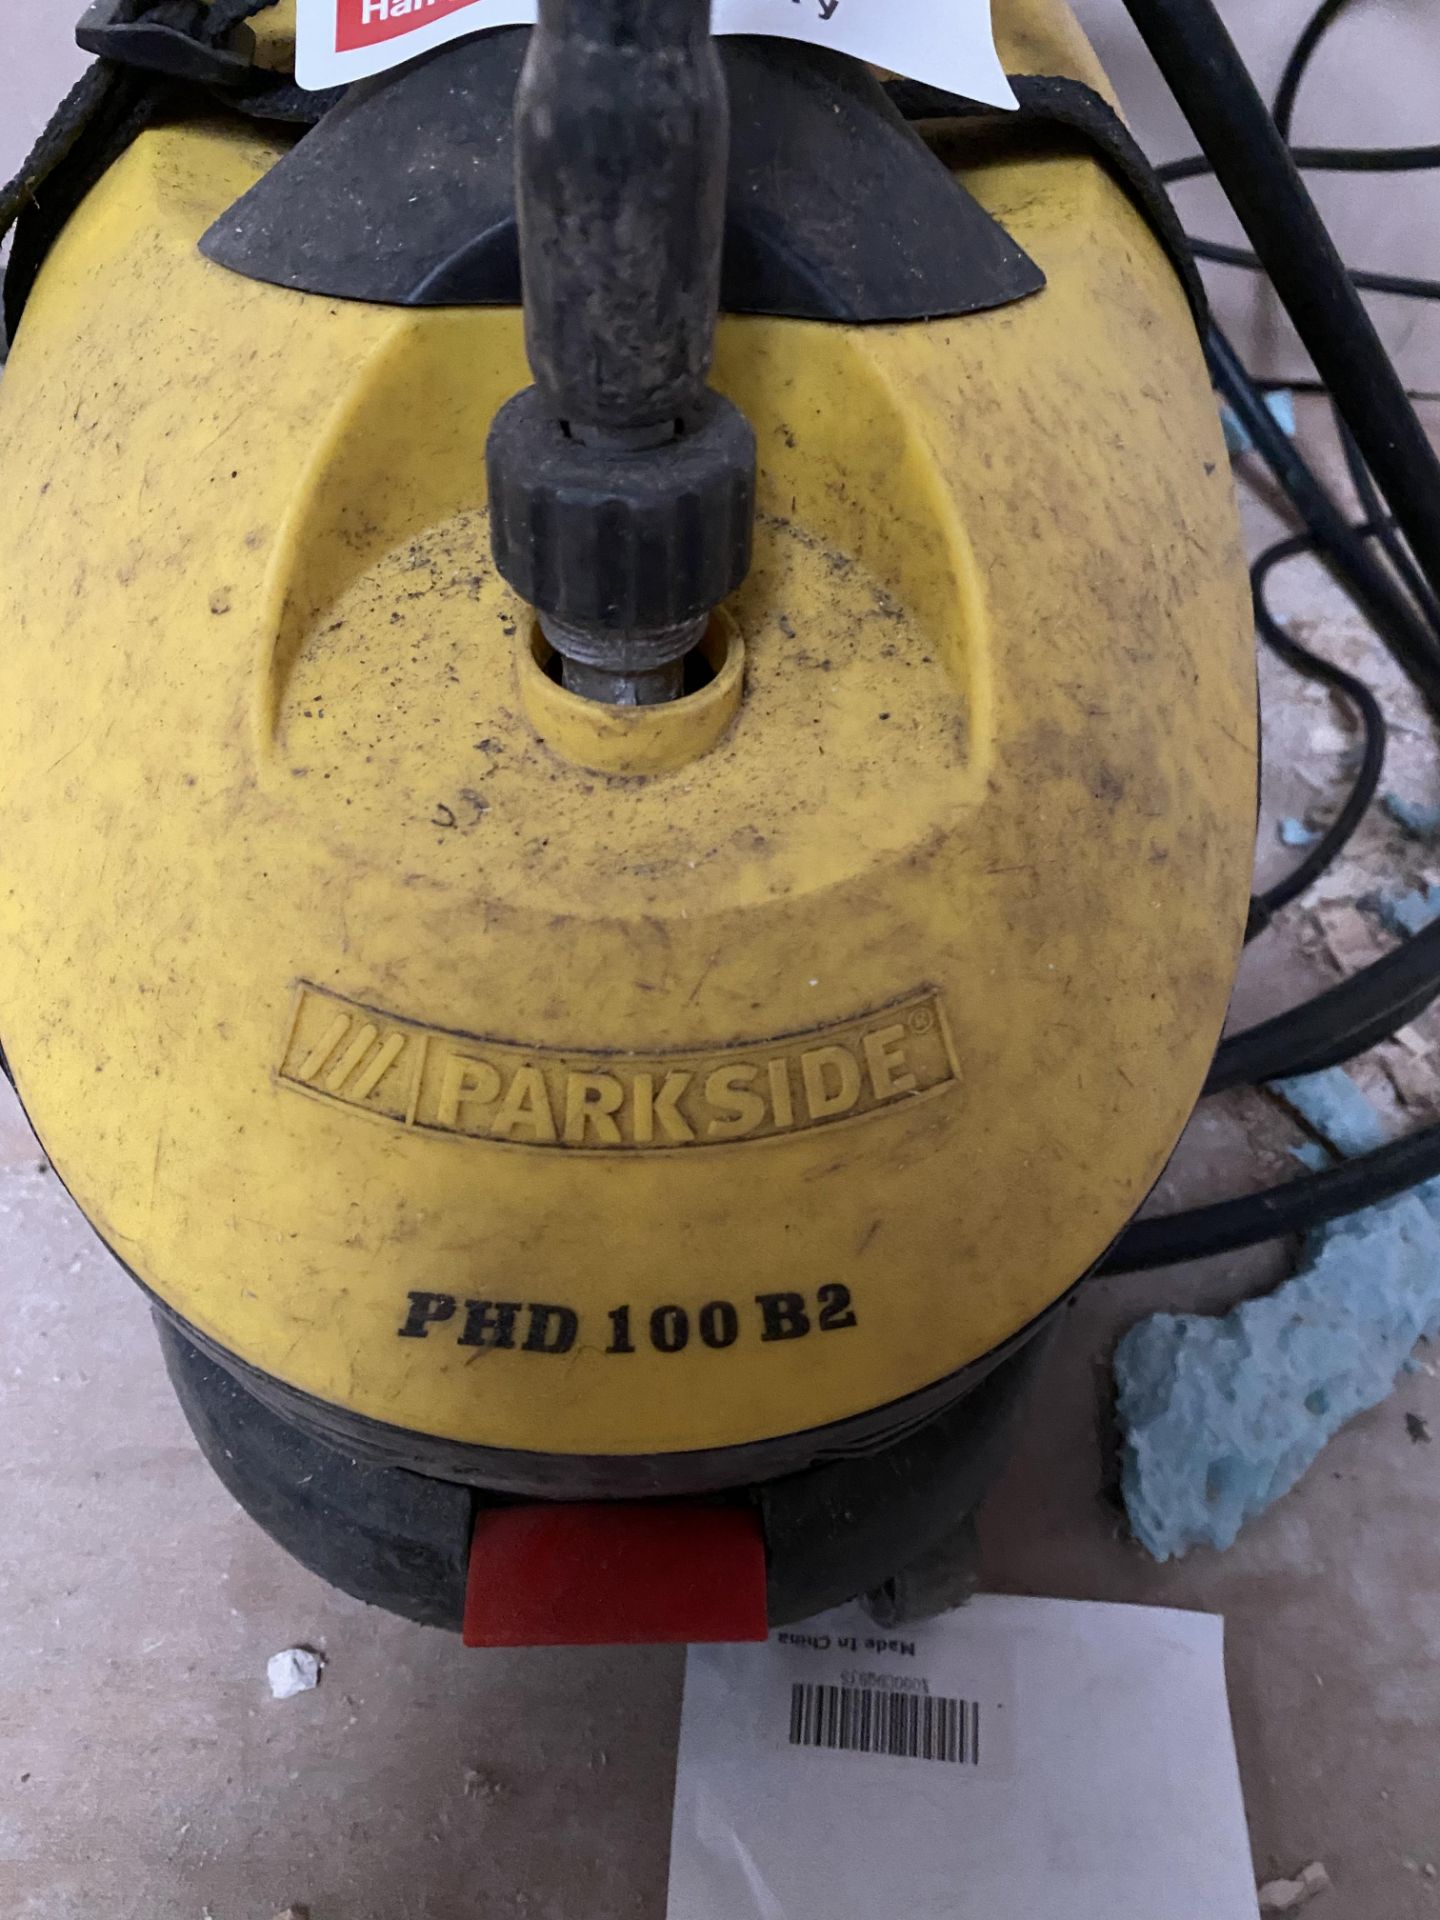 Parkside PHD 100 B2 pressure washer (working condition unknown) - Image 2 of 3